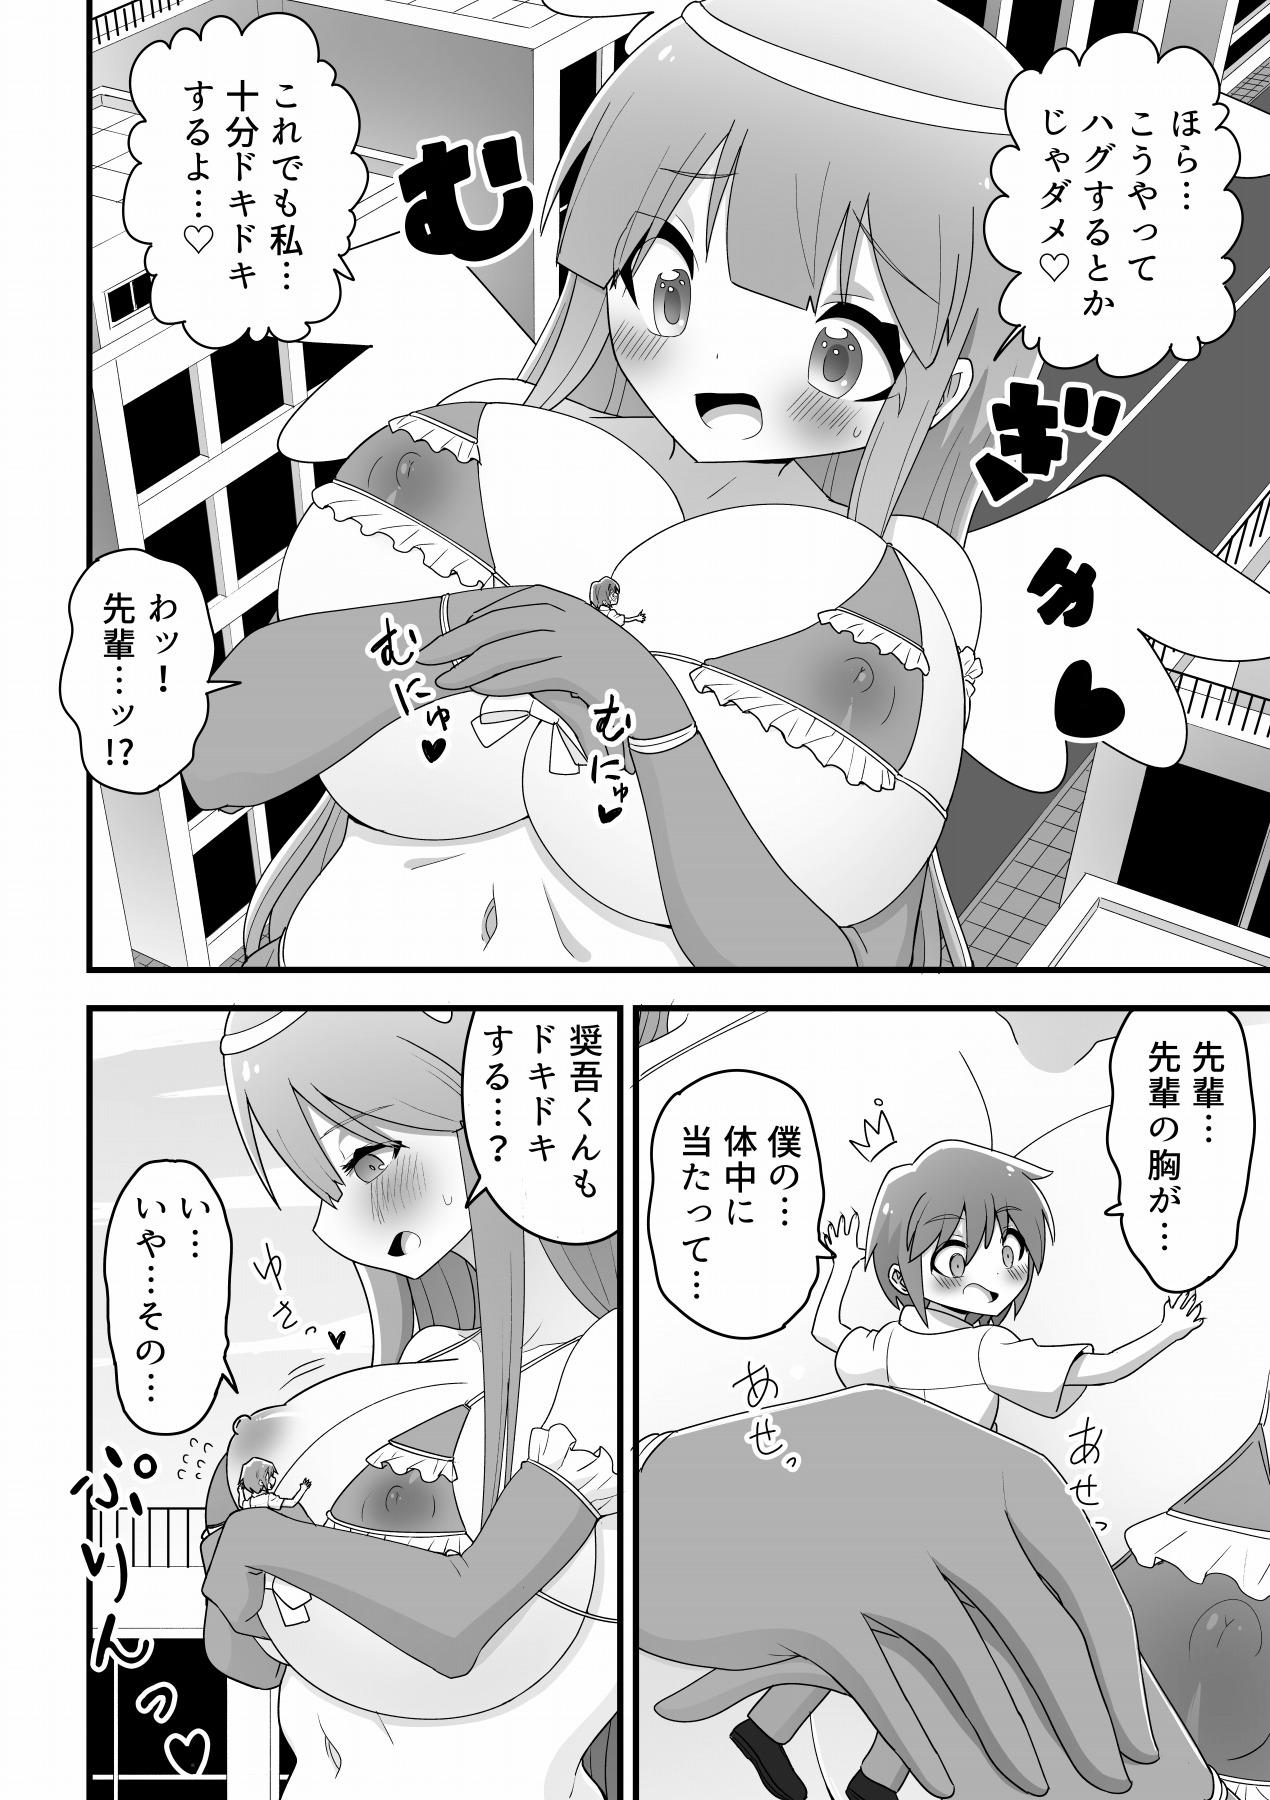 Gay Group A story about an ordinary school girl becoming a giant magical girl and having sex with a junior boy to save the world - Original Gostosas - Page 8